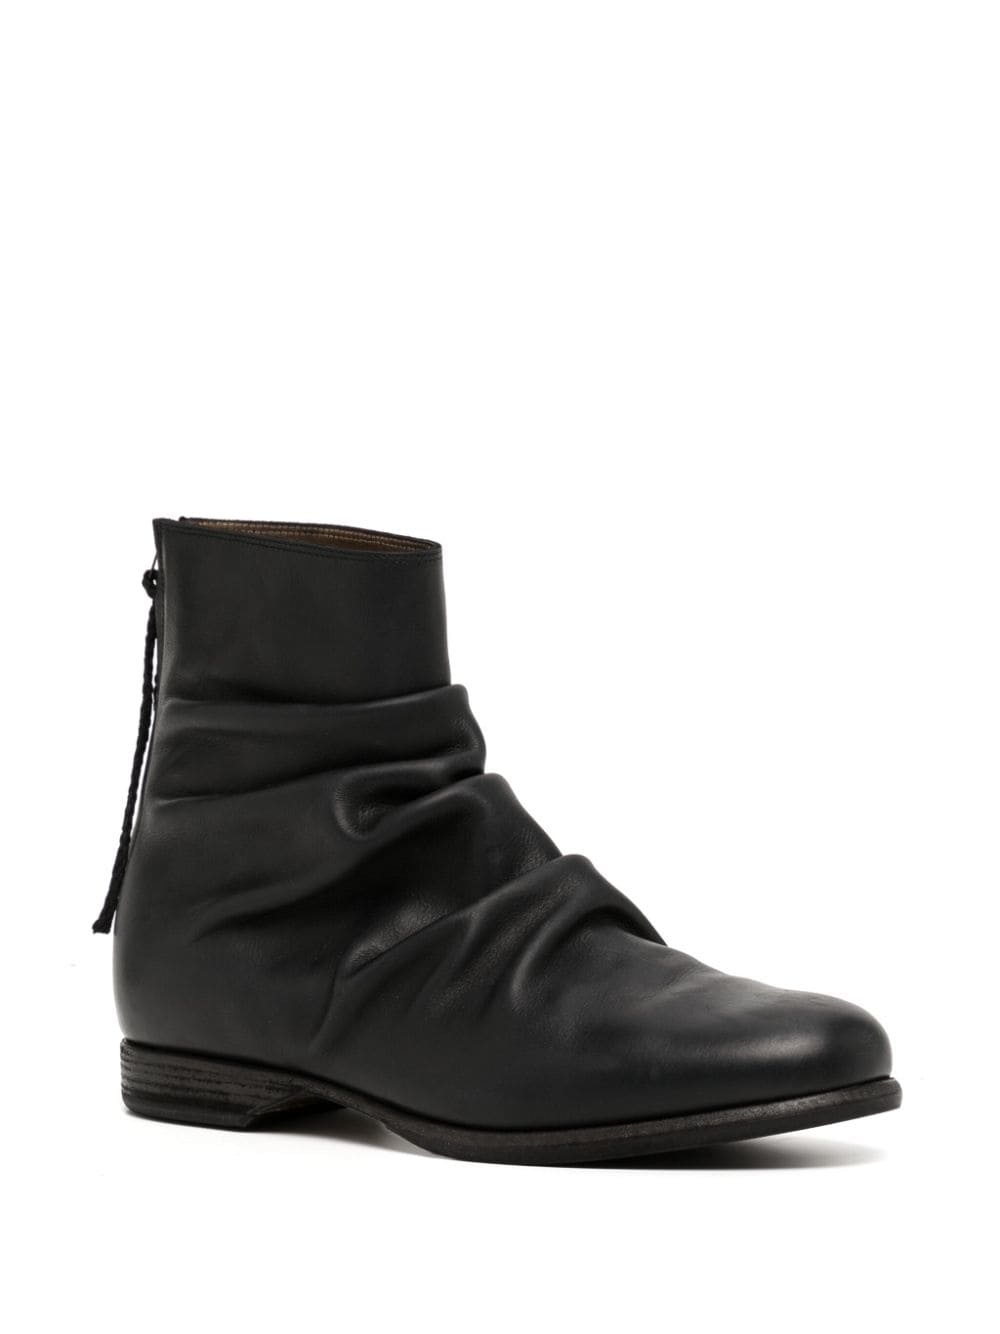 pleat-detail leather boots - 2